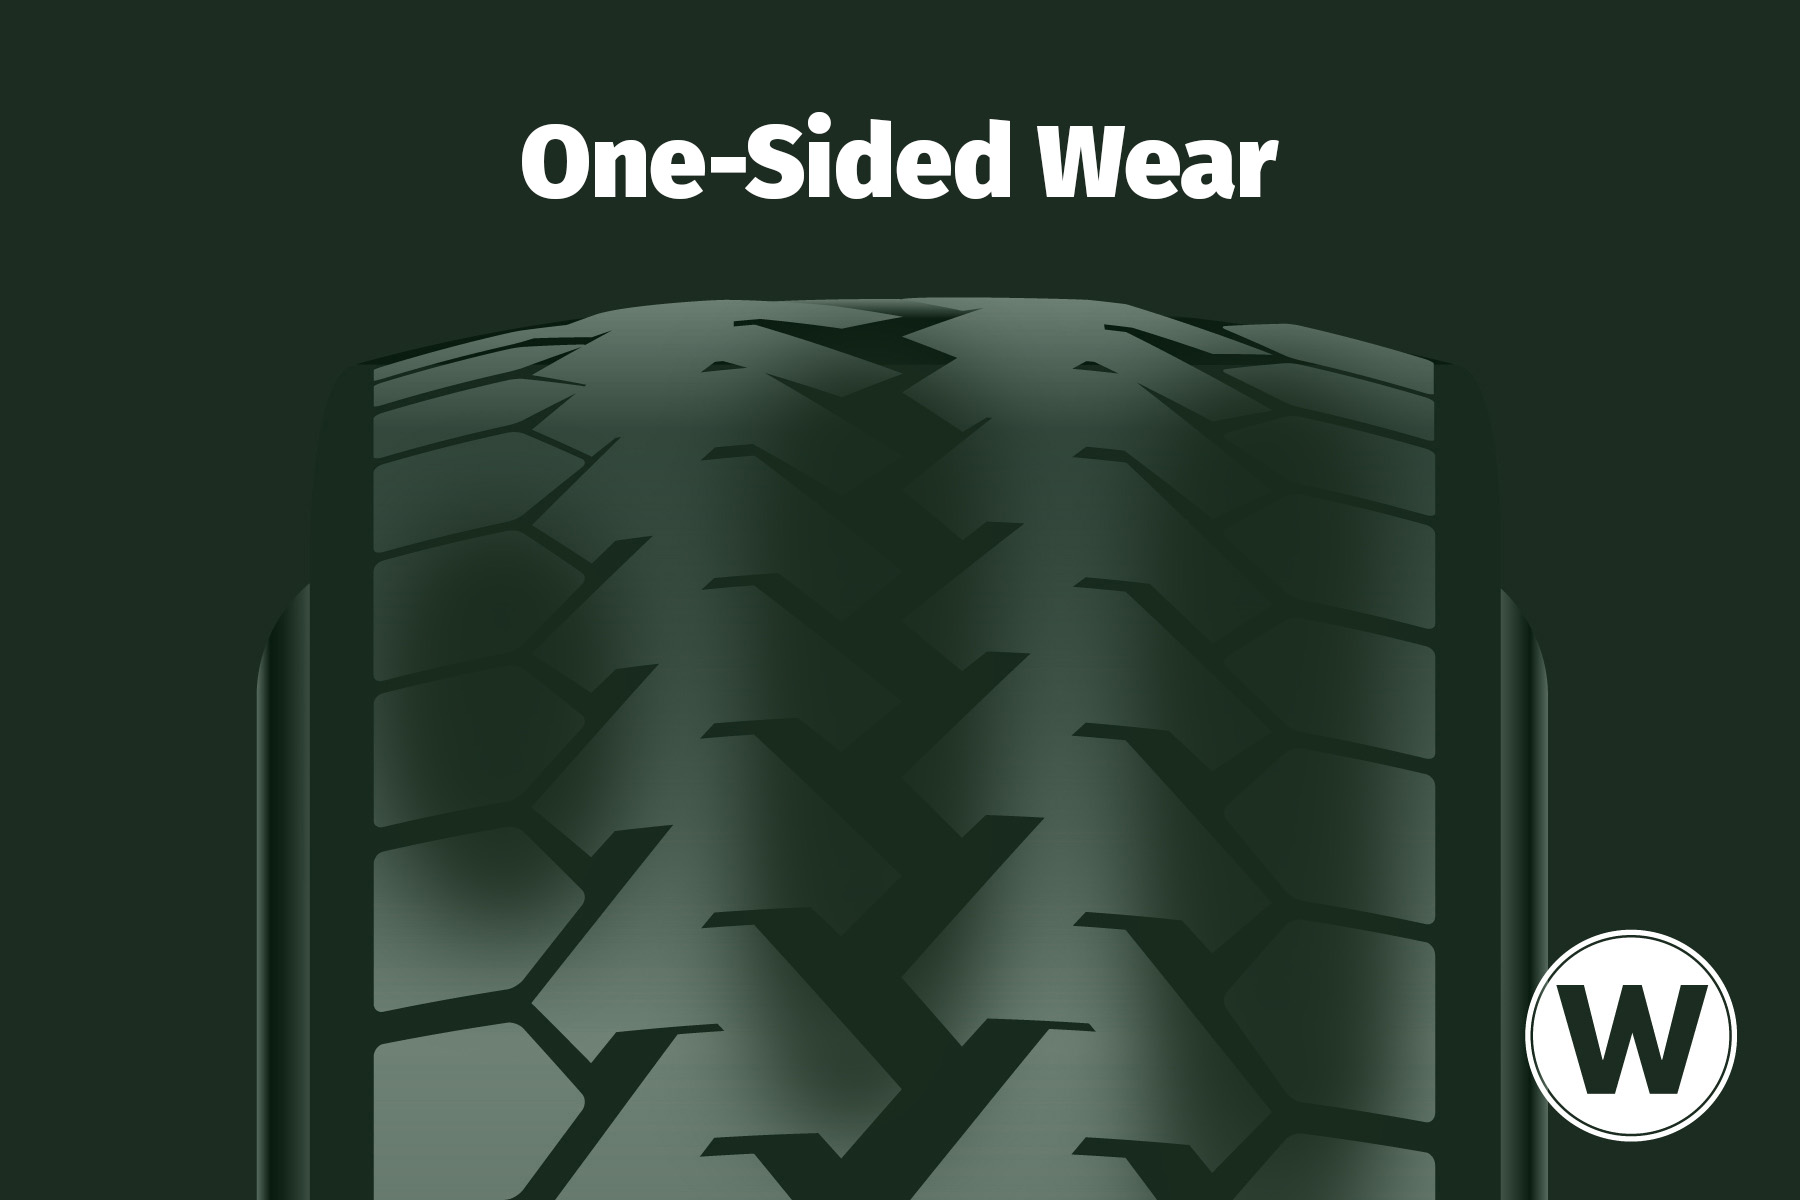 A wear pattern diagram that shows where to find one-sided wear on your commercial steer tires.